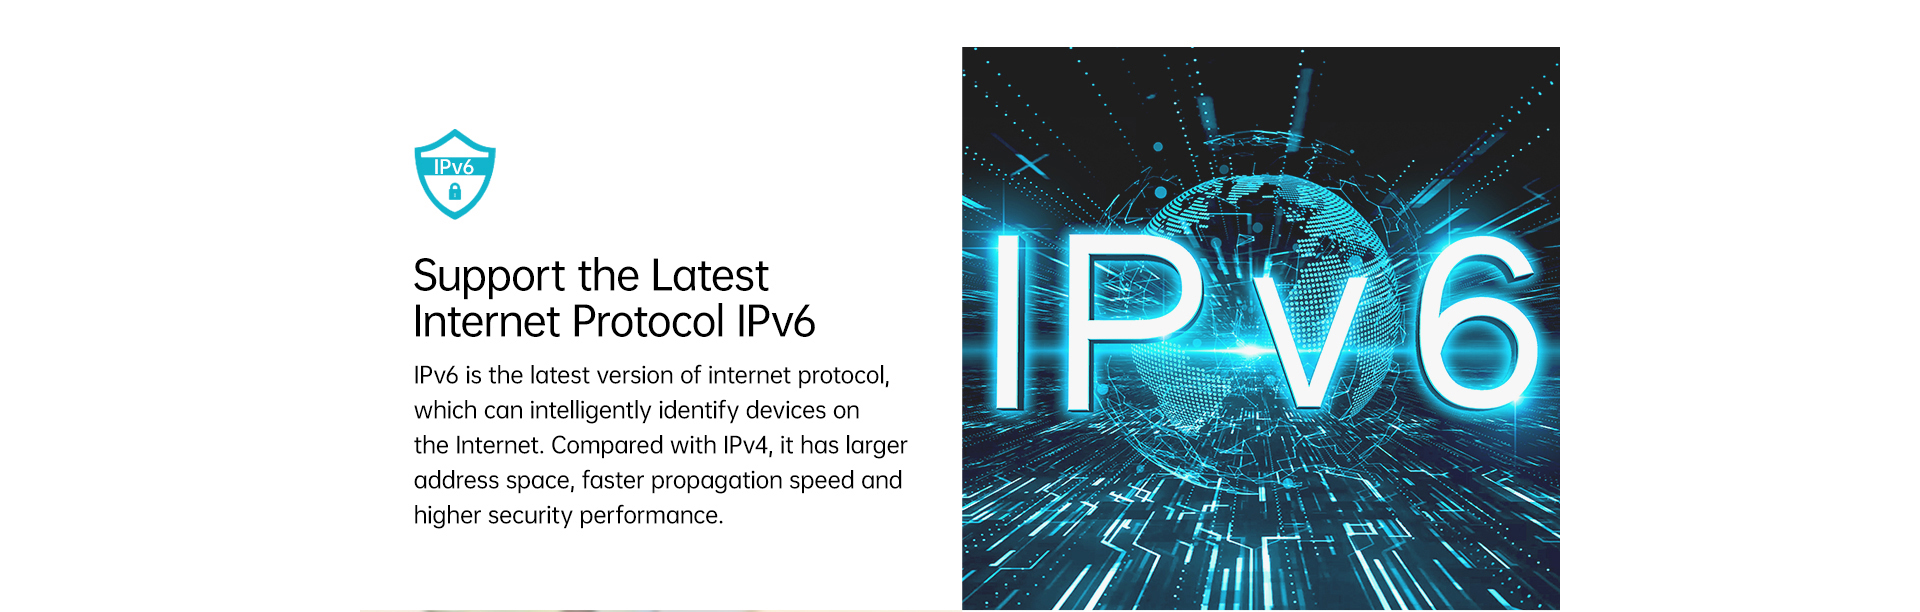 IPV6 support Router